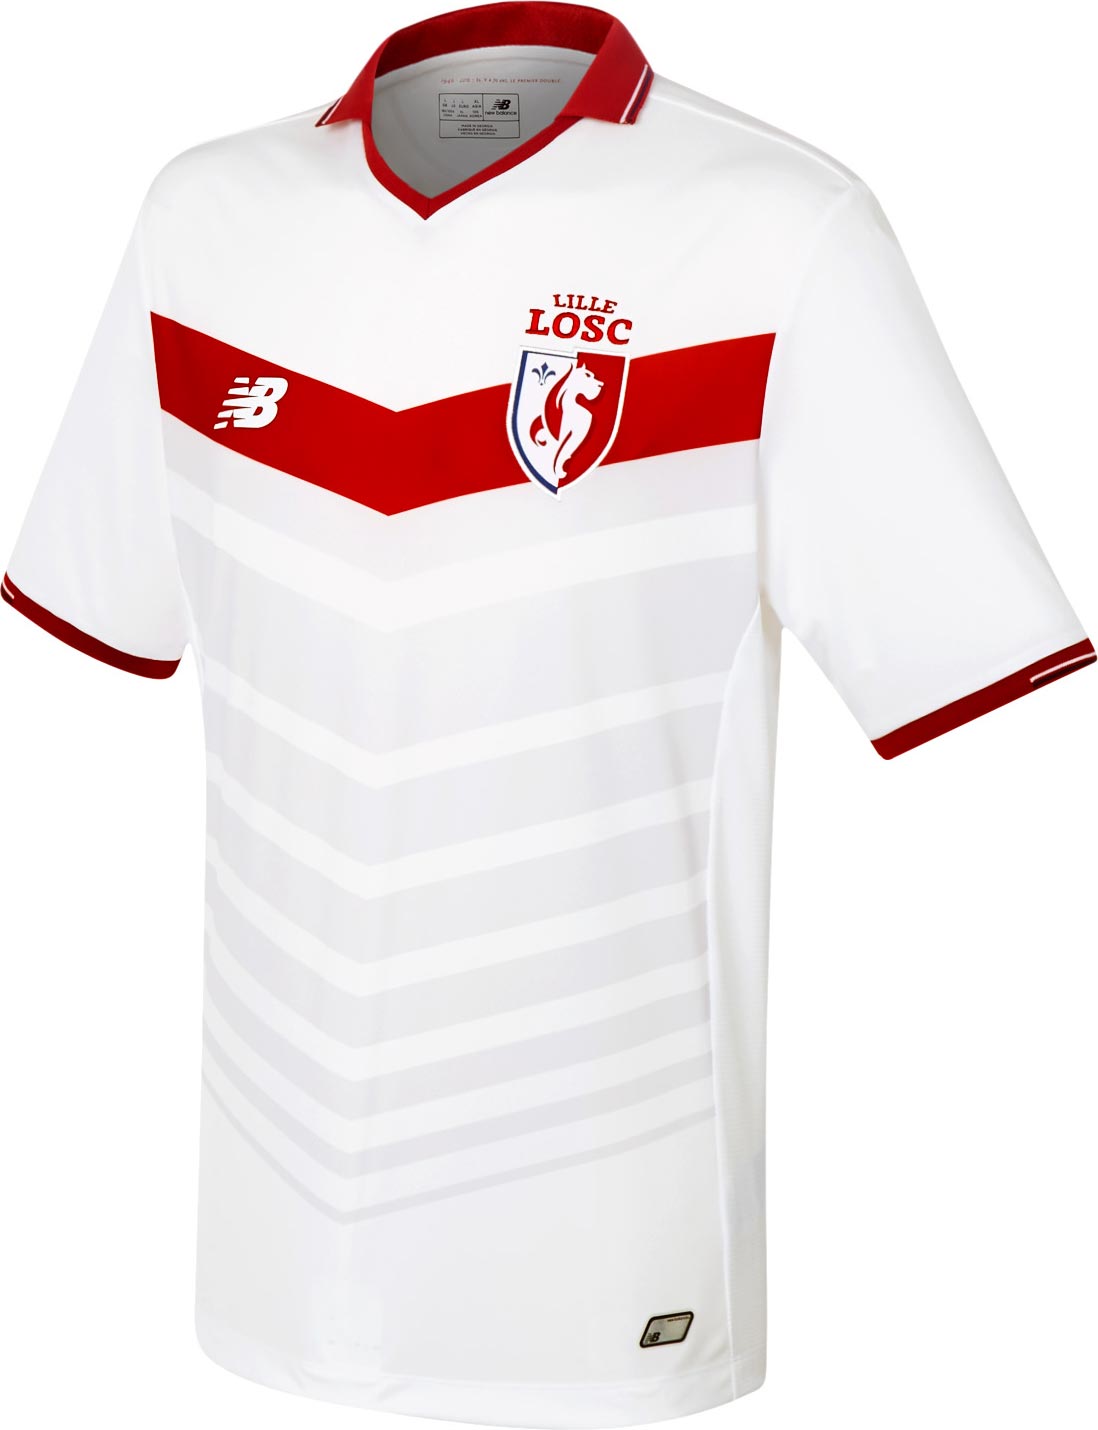 new balance vieux lille, This is the new Lille 2016-2017 home shirt by New Balance Football.